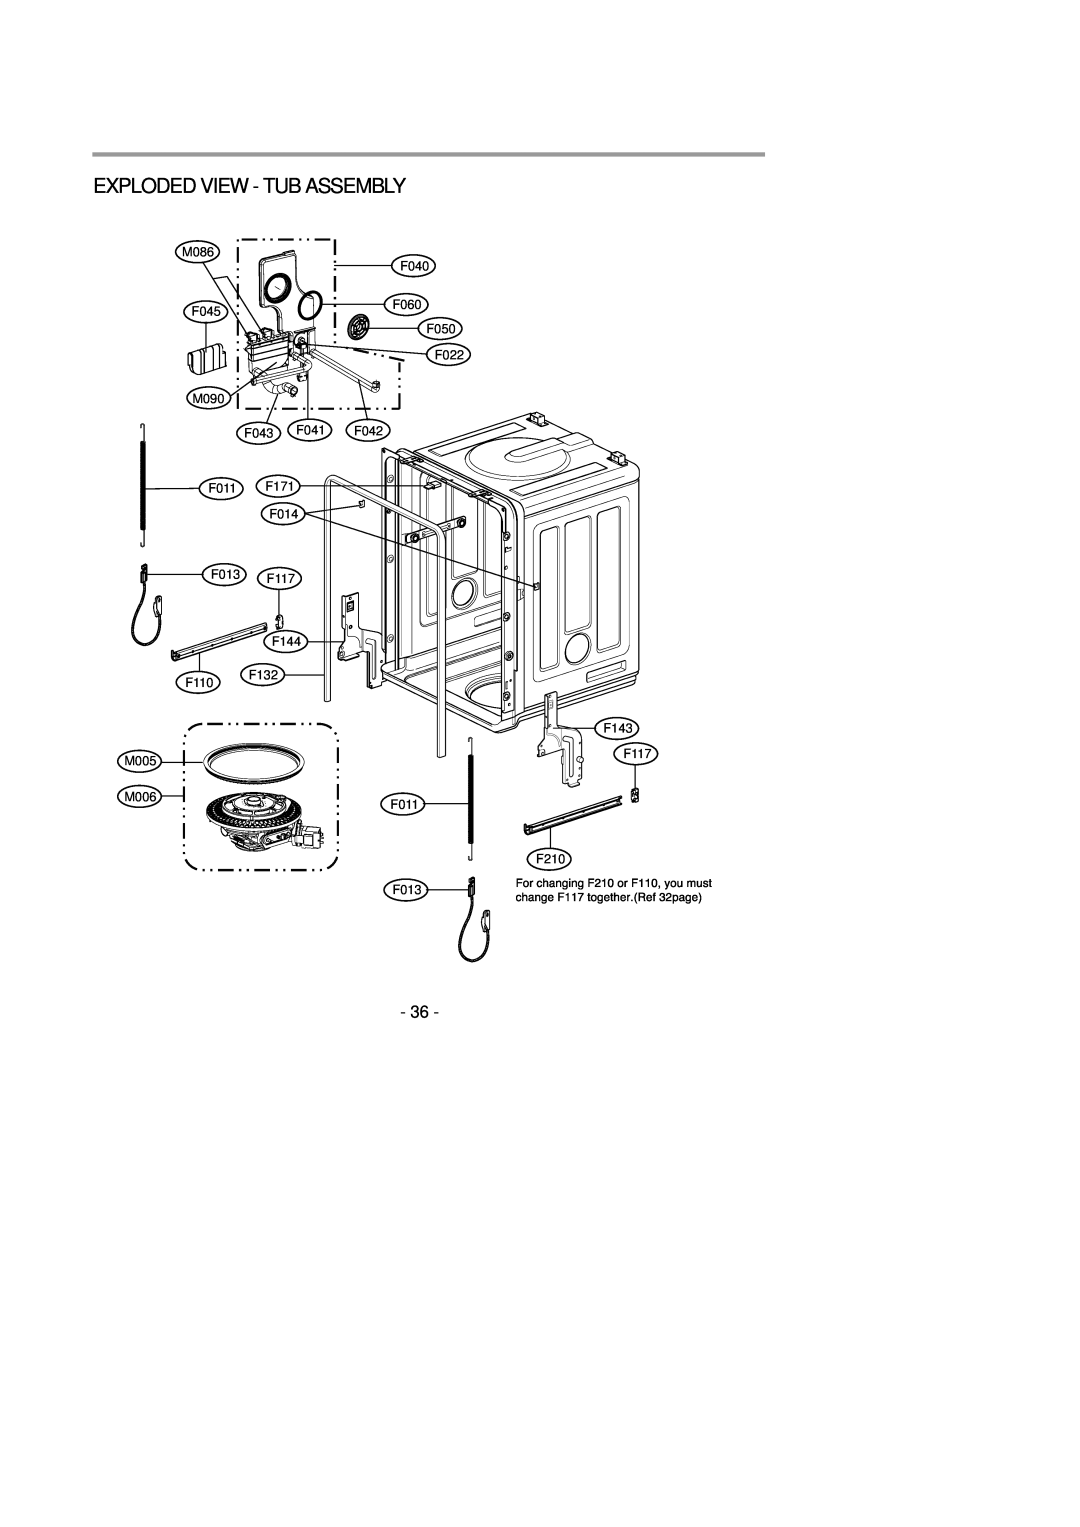 LG Electronics LDS4821(WW service manual Exploded View - Tub Assembly 